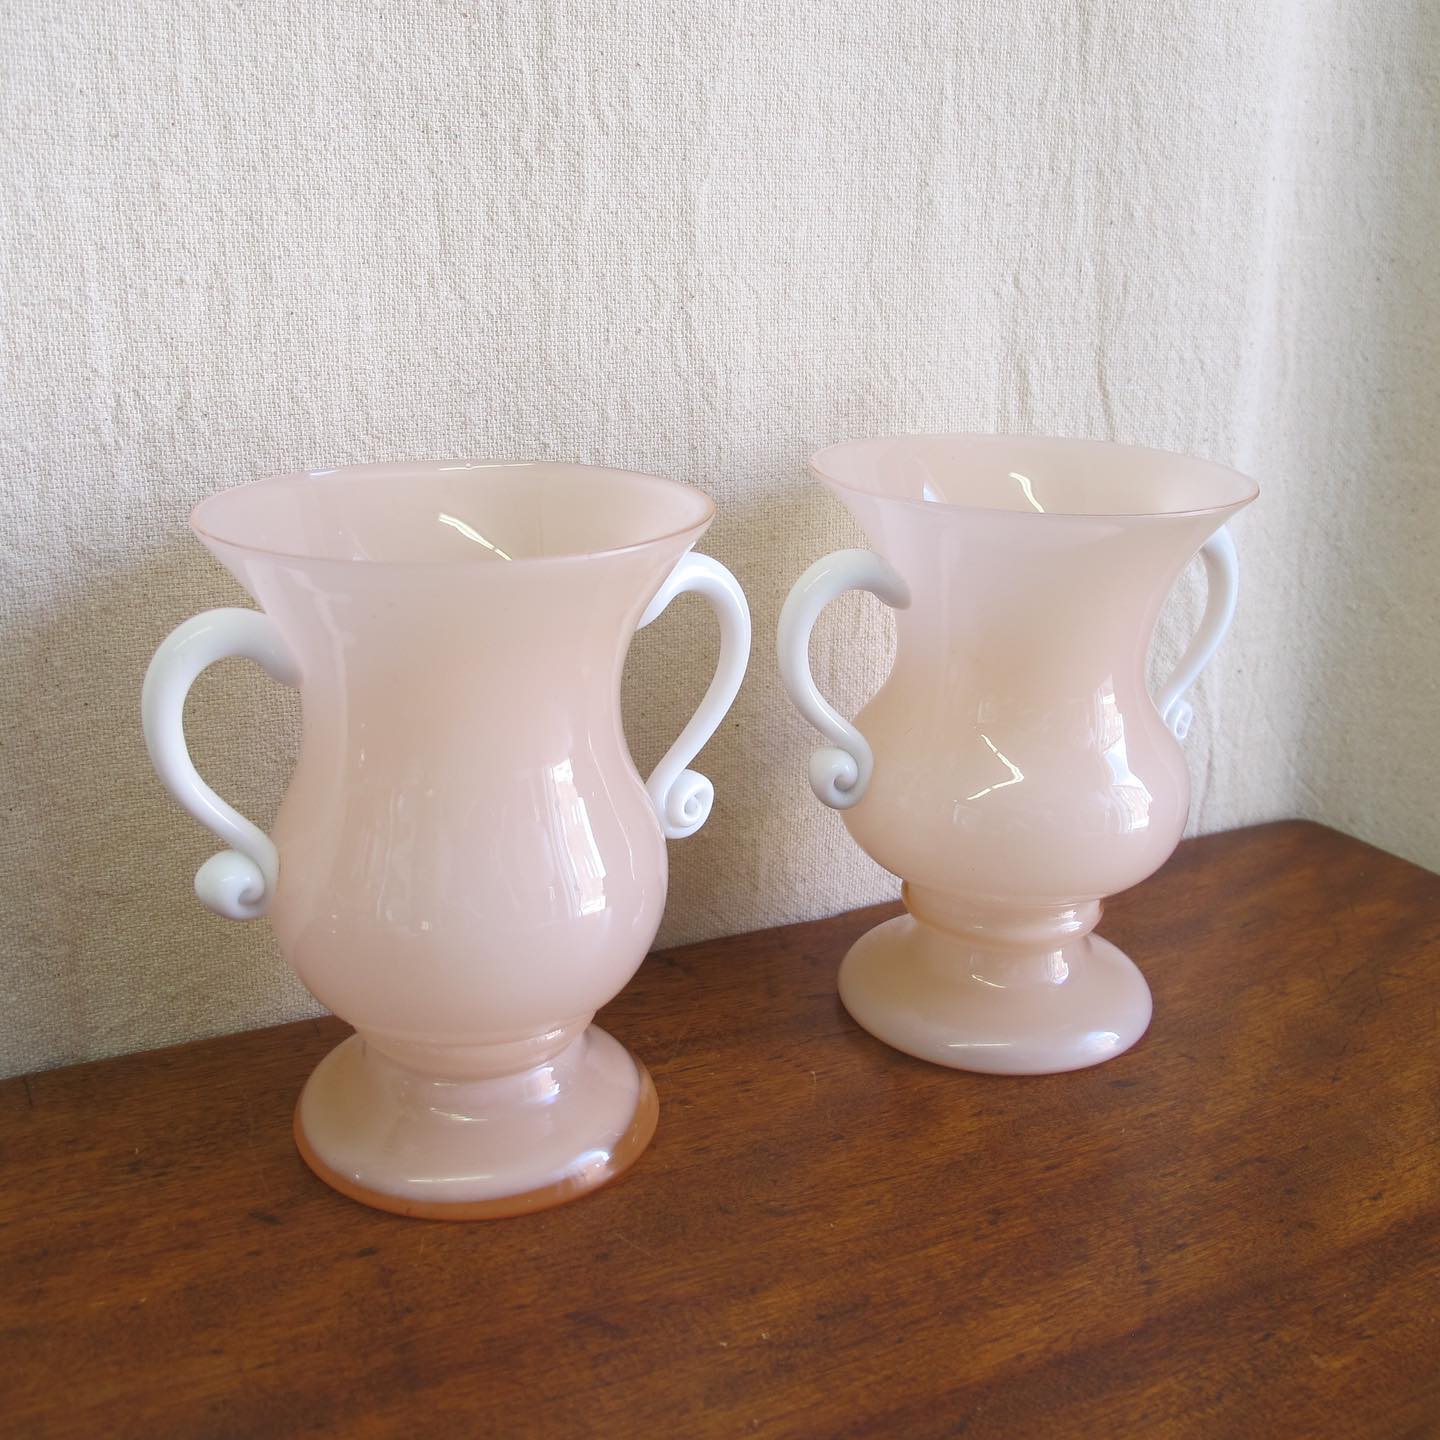 Pair of Czech art glass urn-form vases in shell pink opaline glass, c. 1920 1930